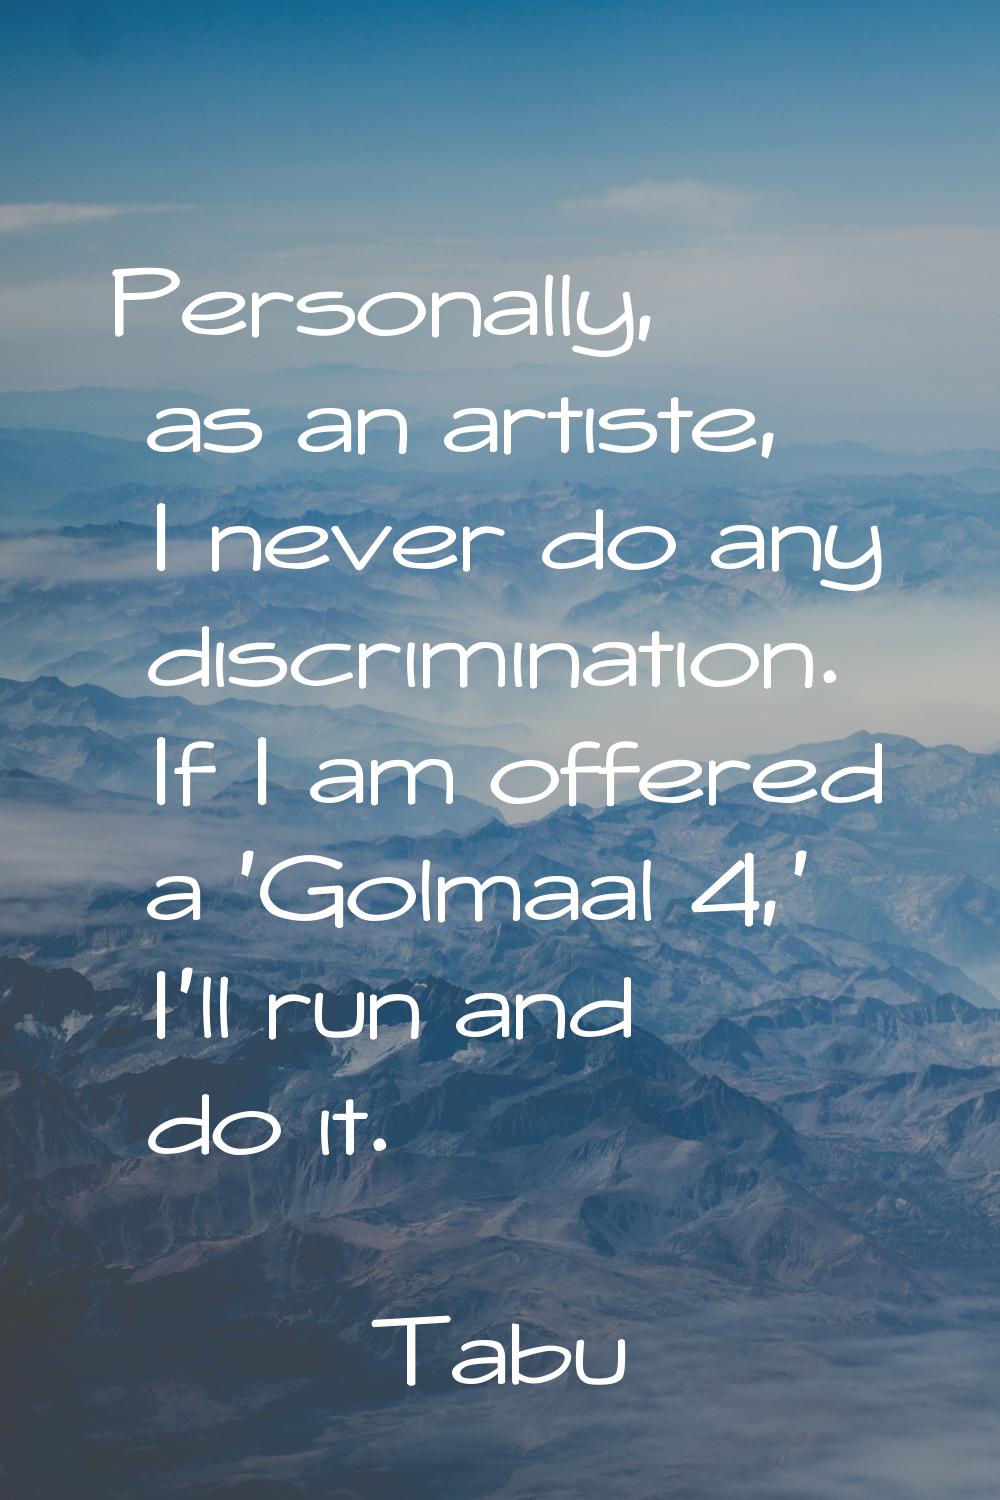 Personally, as an artiste, I never do any discrimination. If I am offered a 'Golmaal 4,' I'll run a